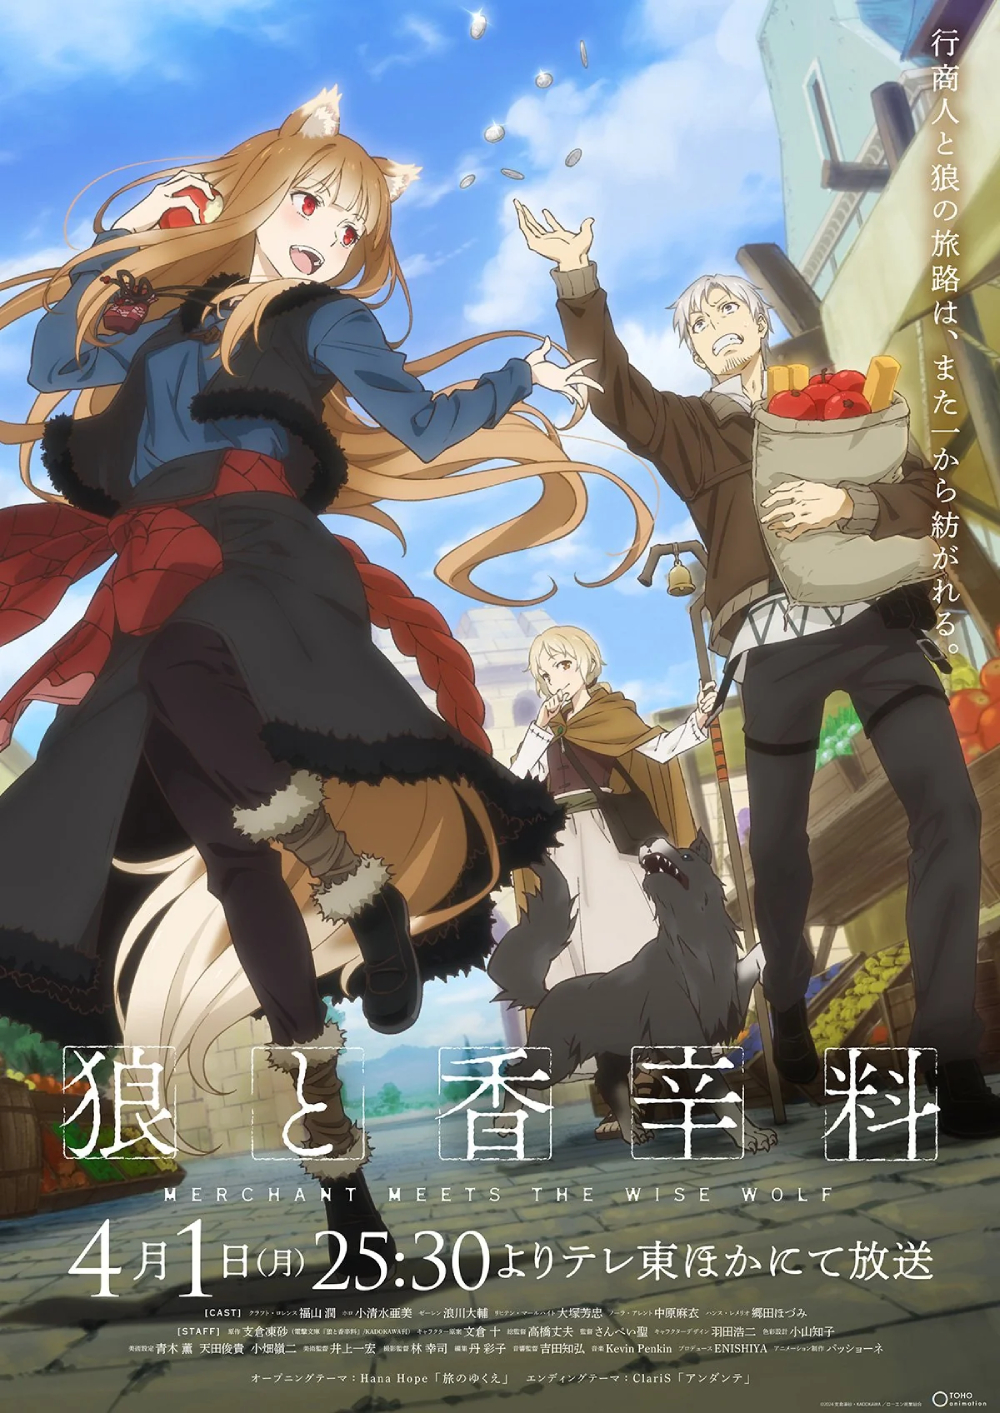 Spice & Wolf merchant meets the wise wolf